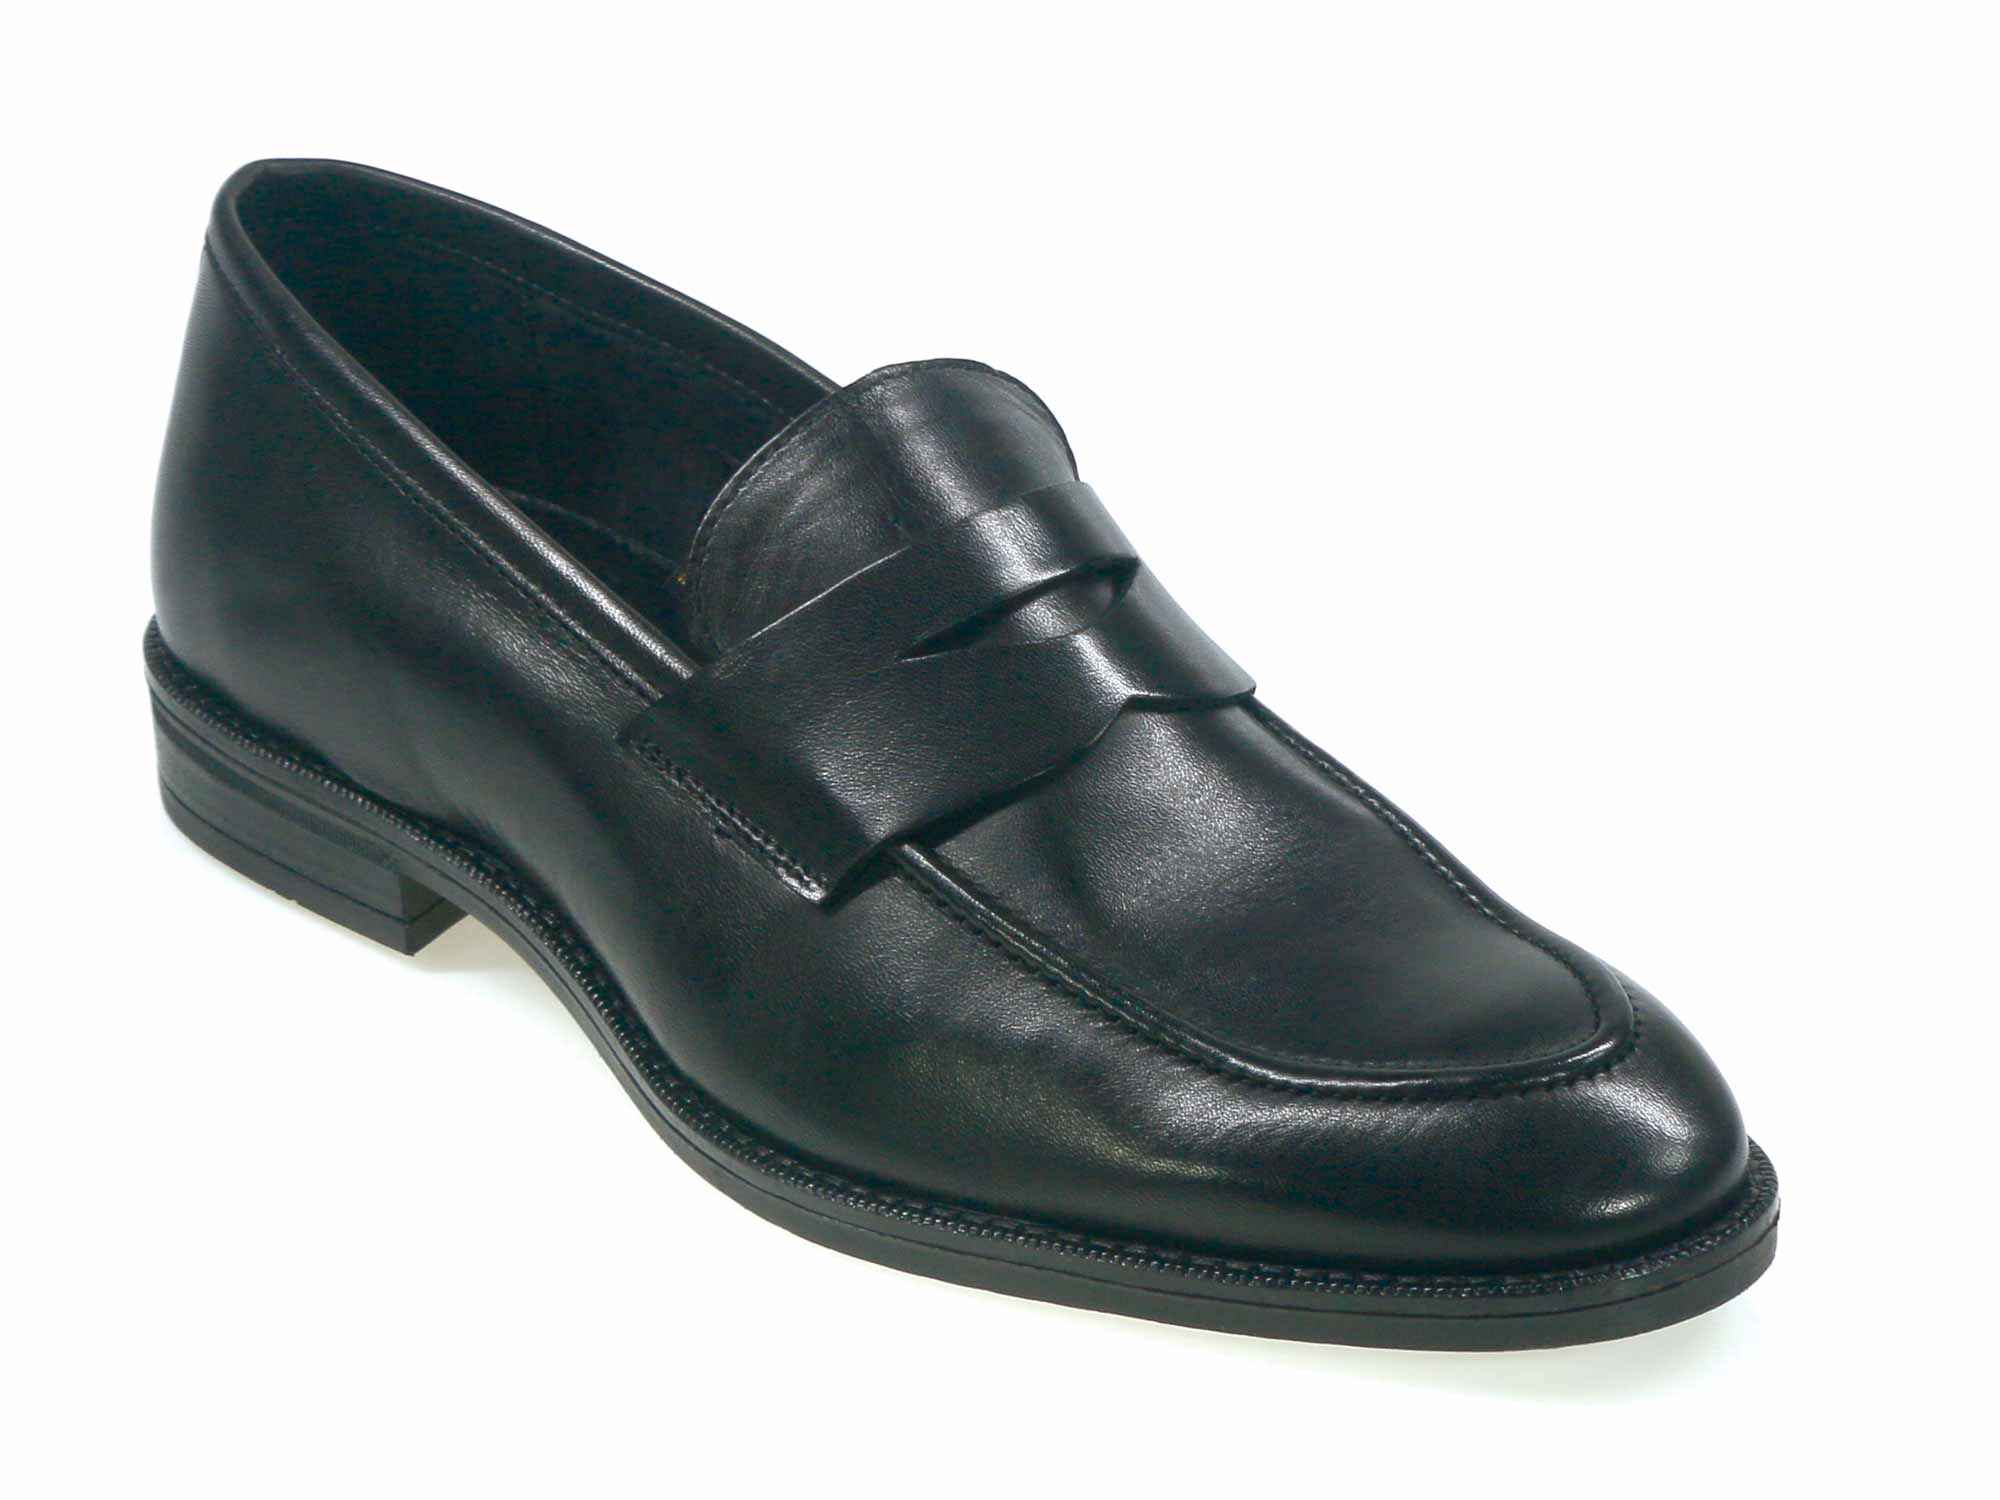 Step into style and comfort with ALTON Men's Black Calf Loafer Slip-On ...